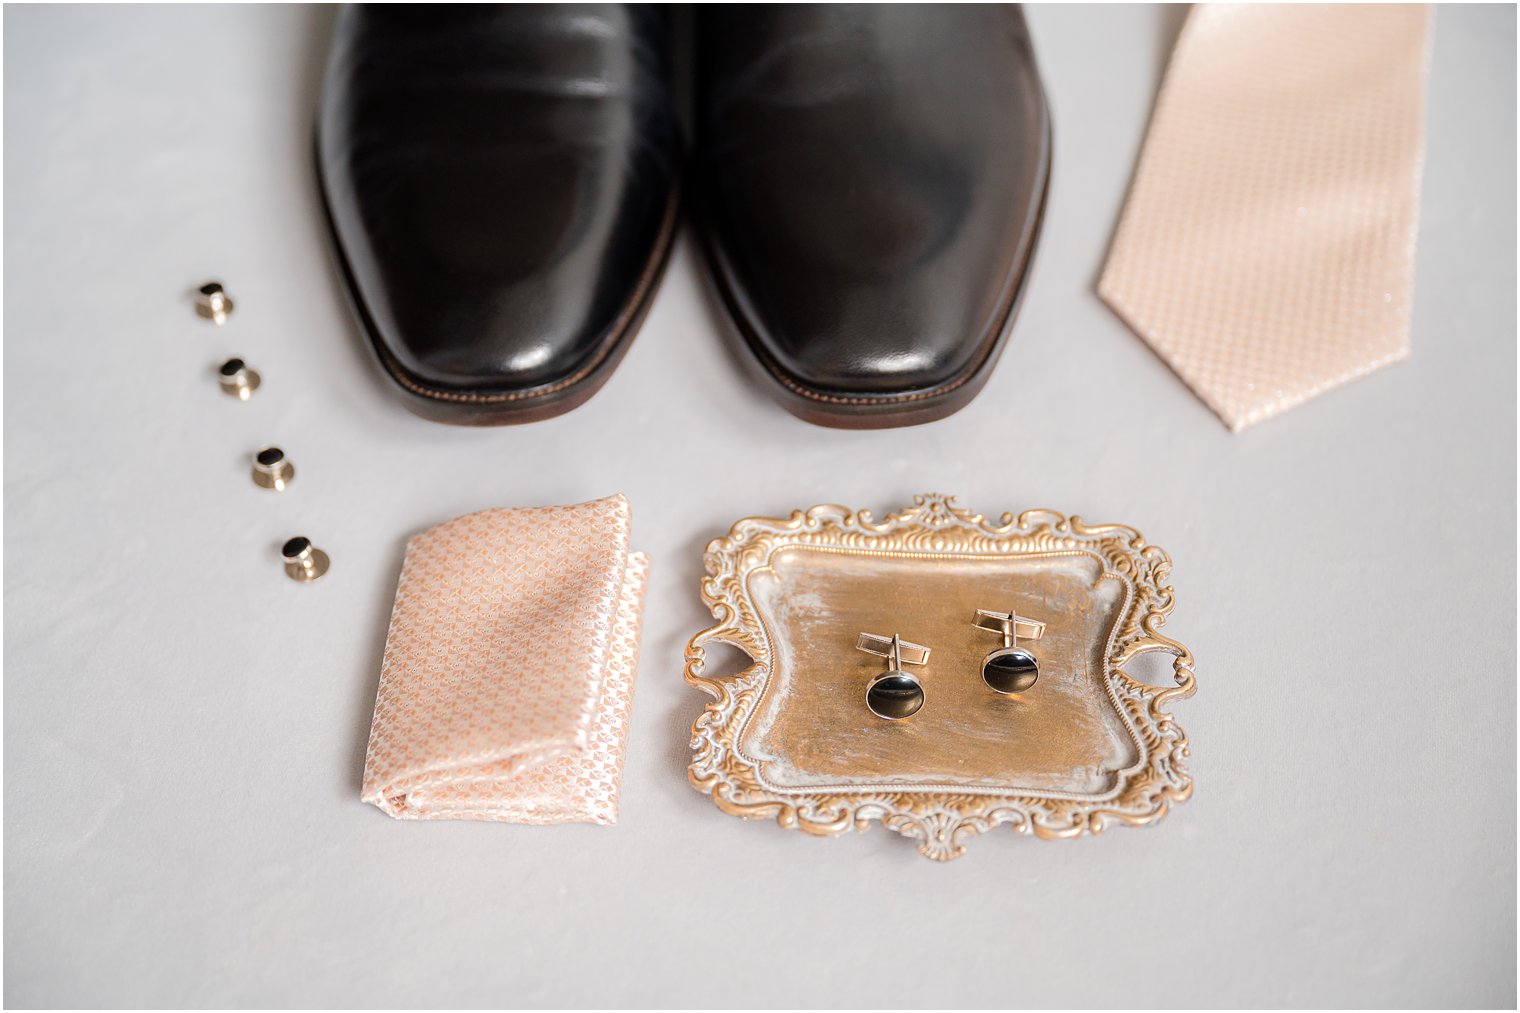 groom's black shoes, cufflinks and peach tie for spring wedding